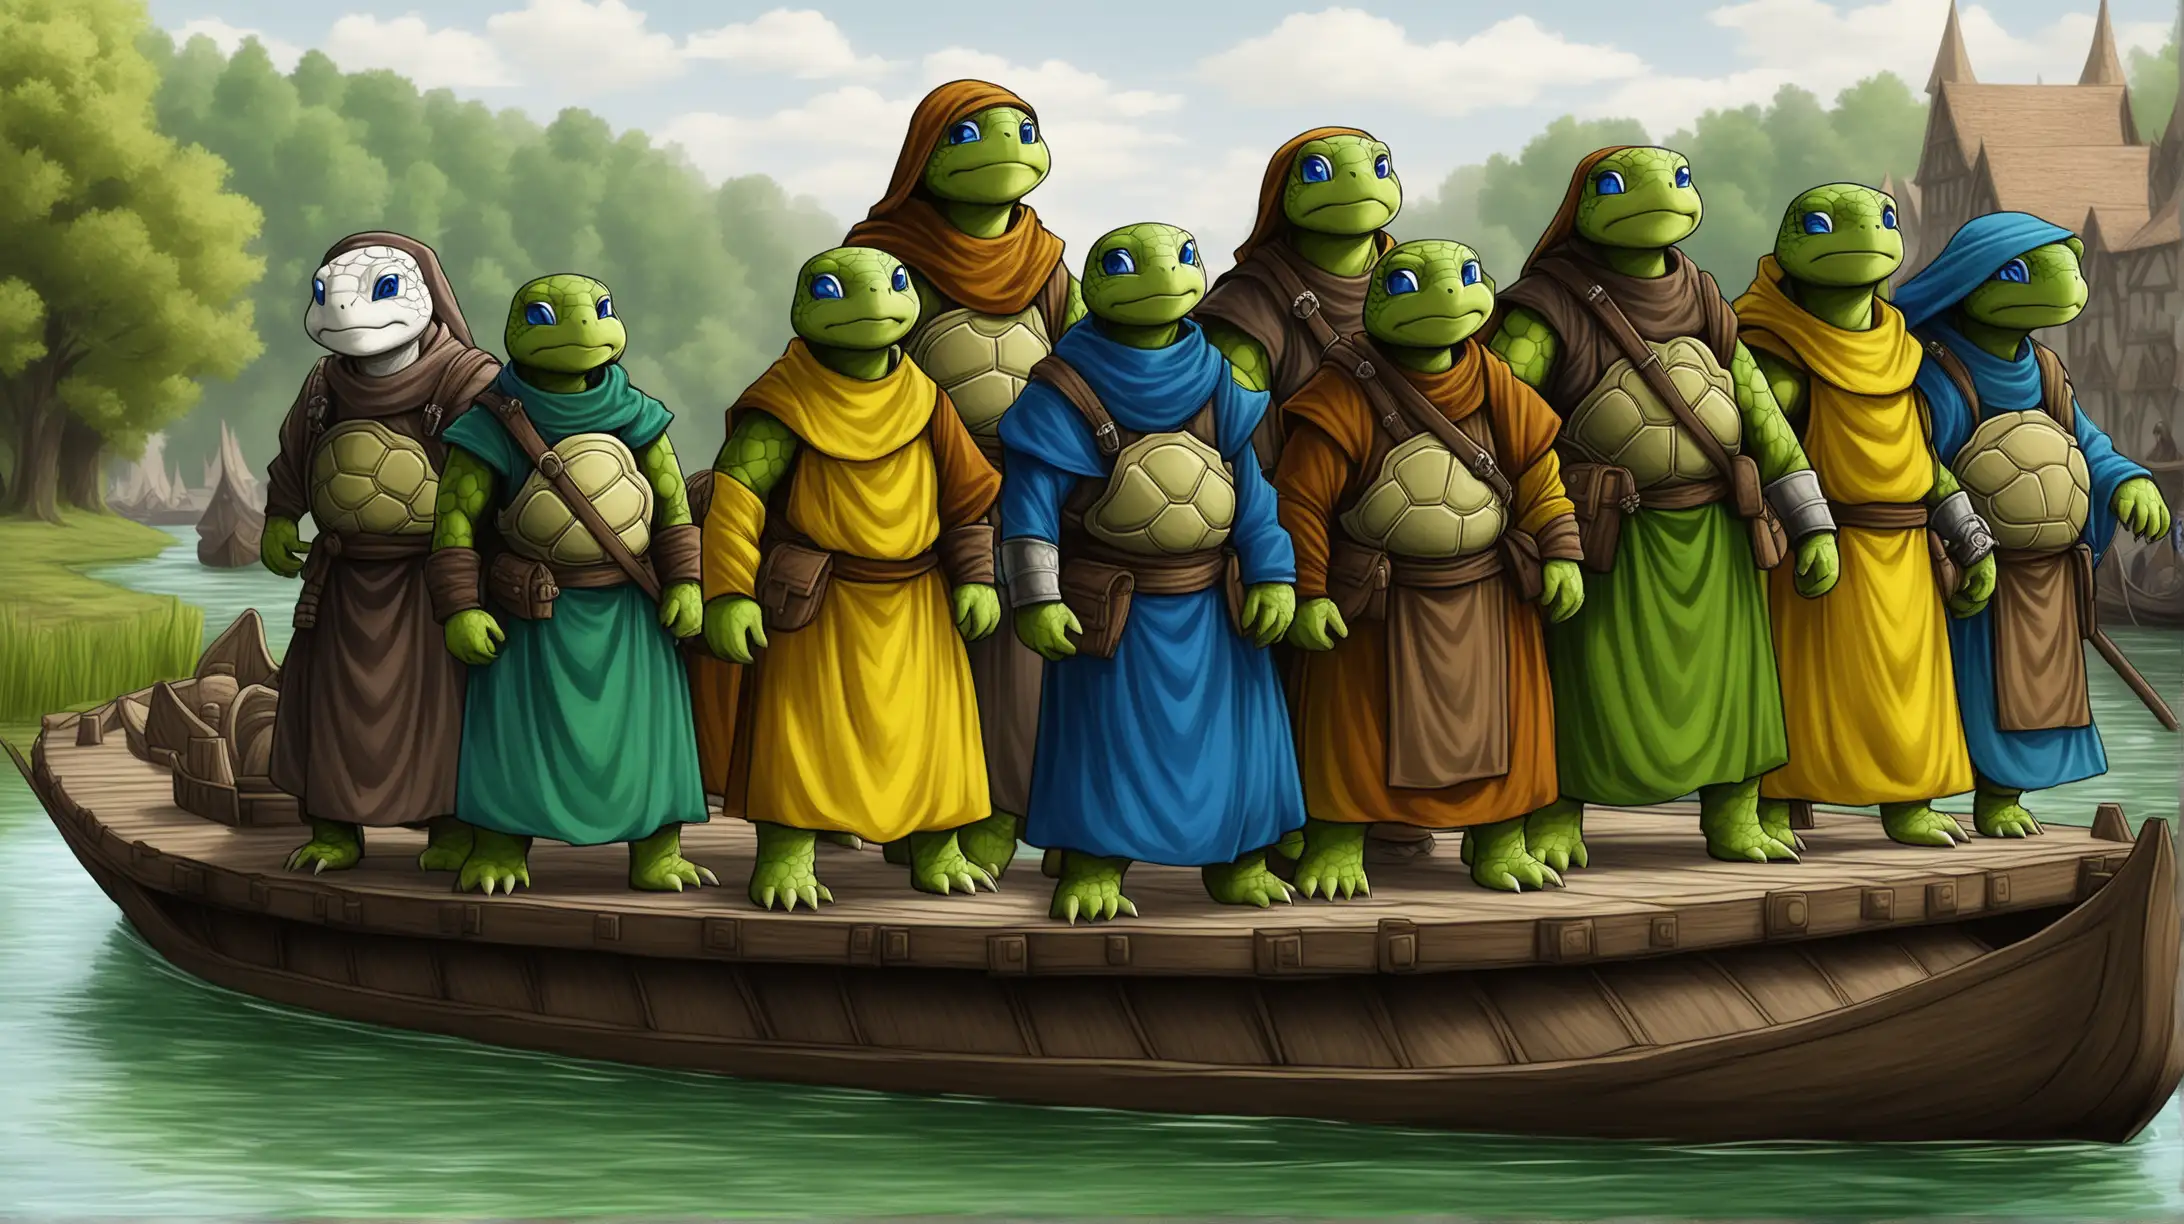 Medieval Fantasy River Barge with Hybrid Turtle Men and Women